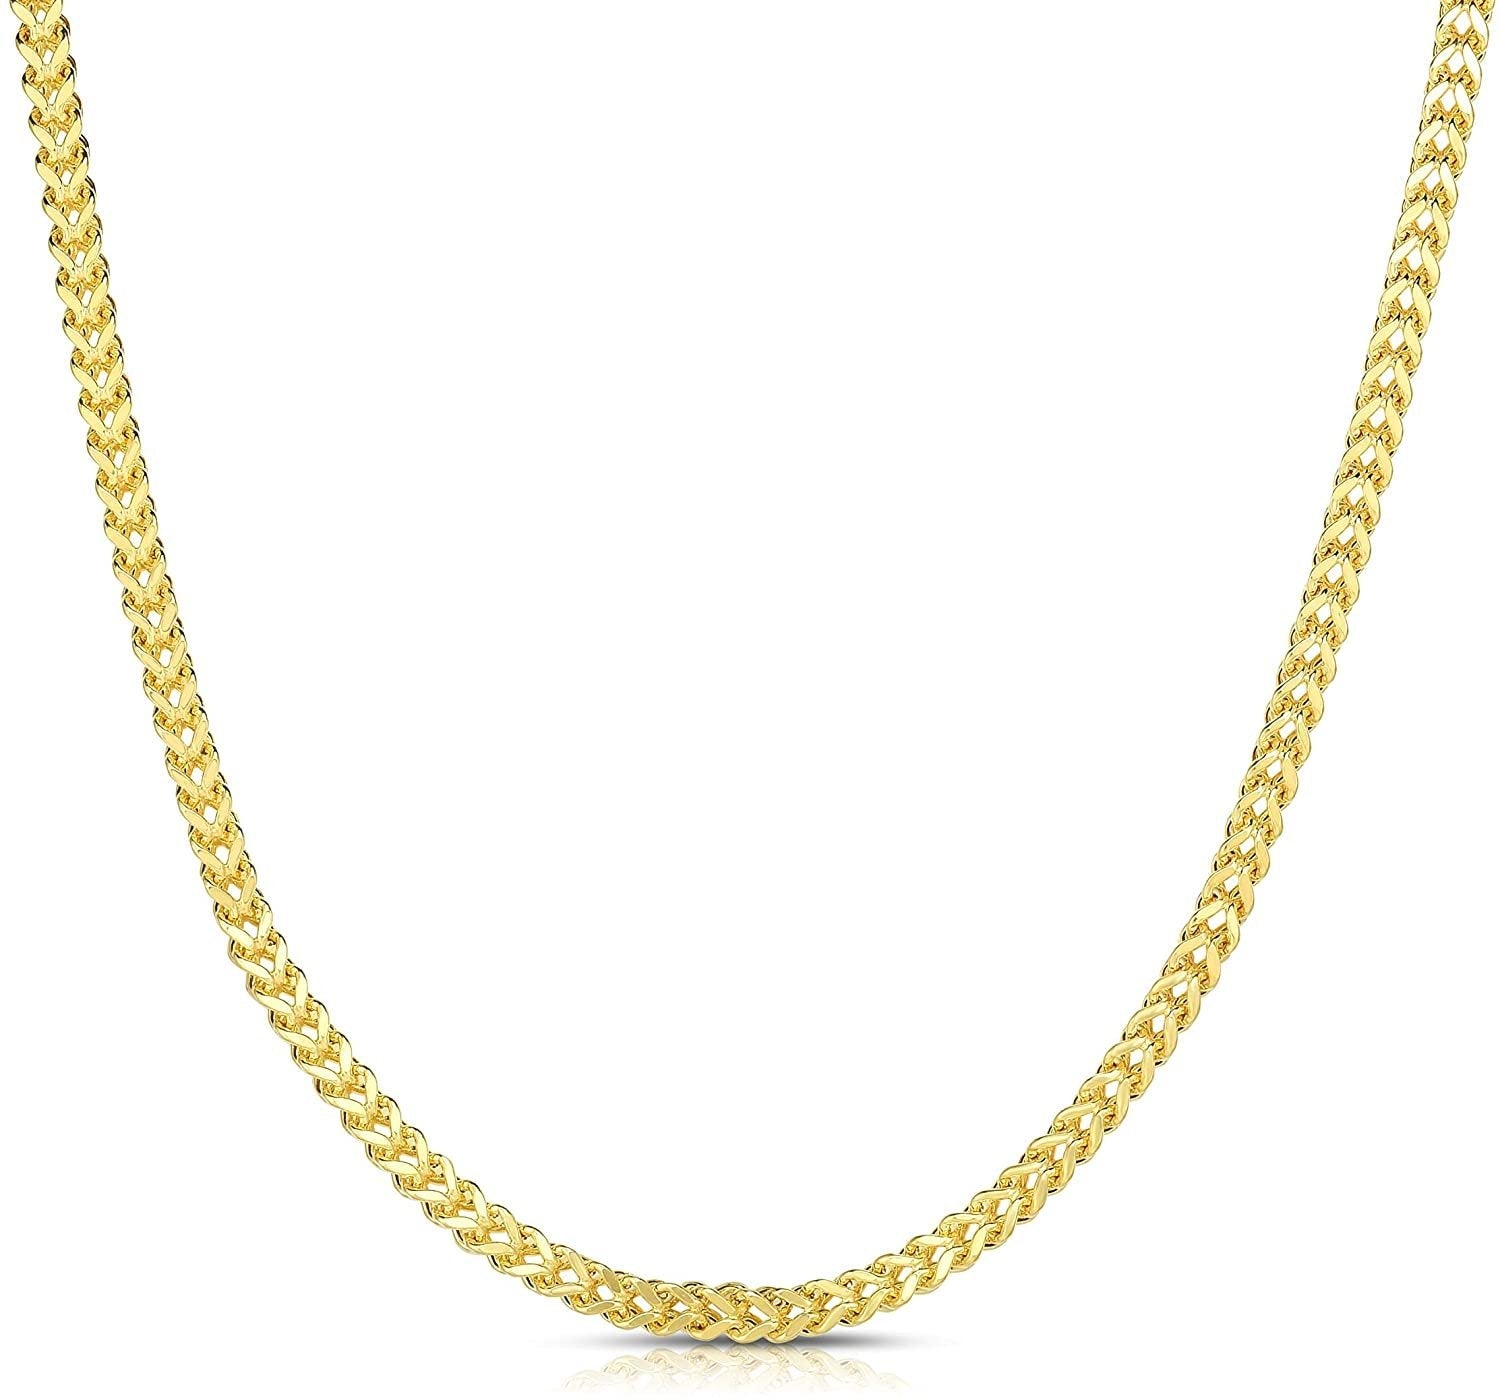 Floreo 10k Yellow Gold 3.2mm Lightweight Franco Chain Necklace